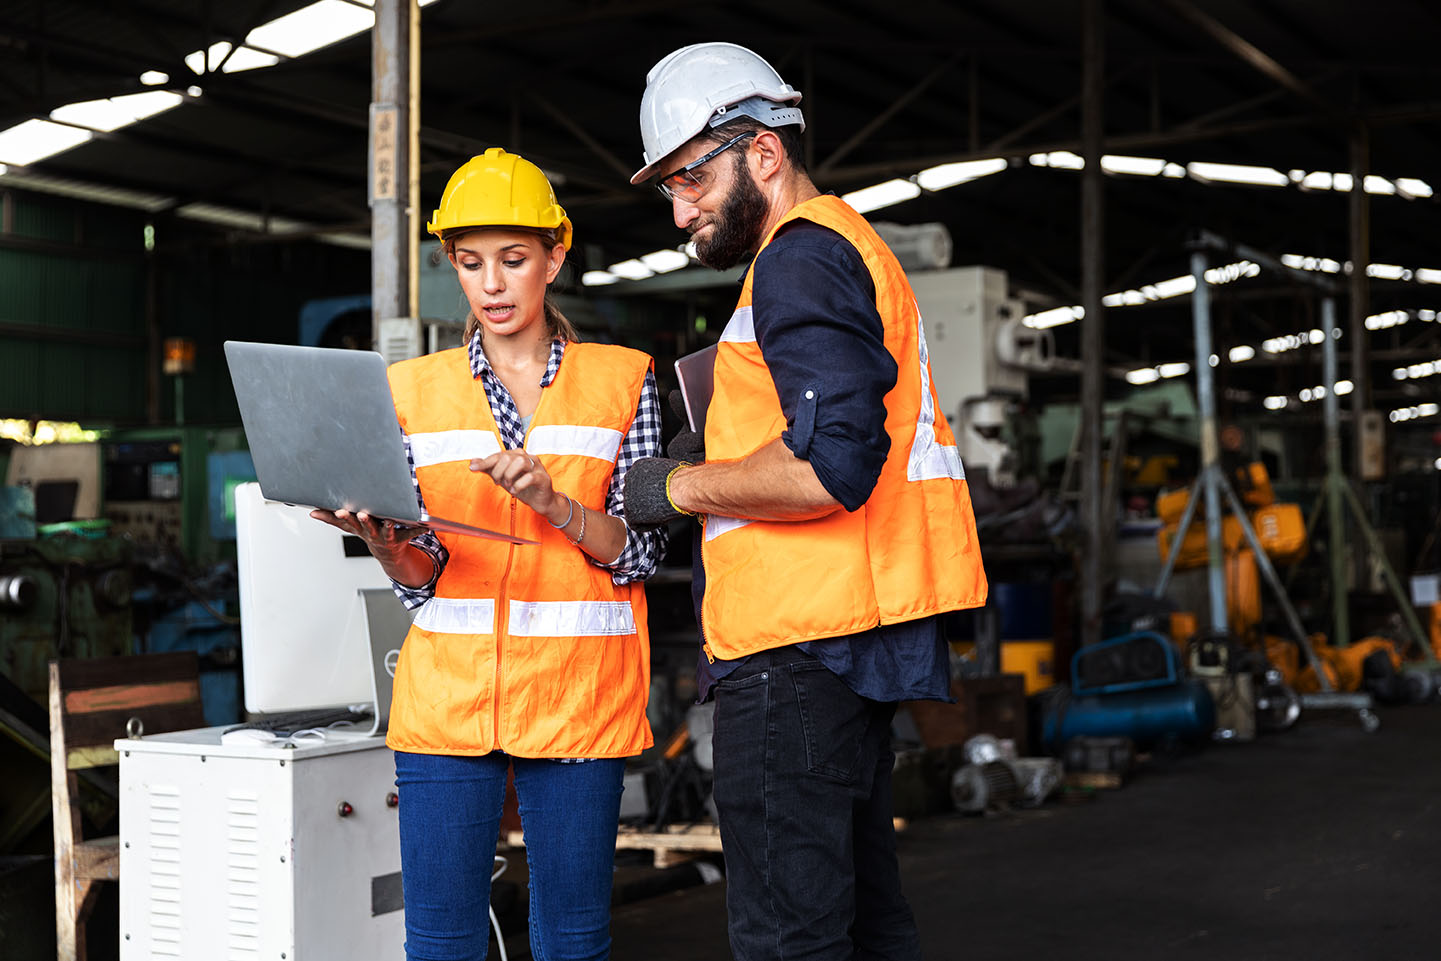 Male and female mechanical engineers or factory workers with safety gears and hard hats discuss about production project using computer laptop to plan in a warehouse